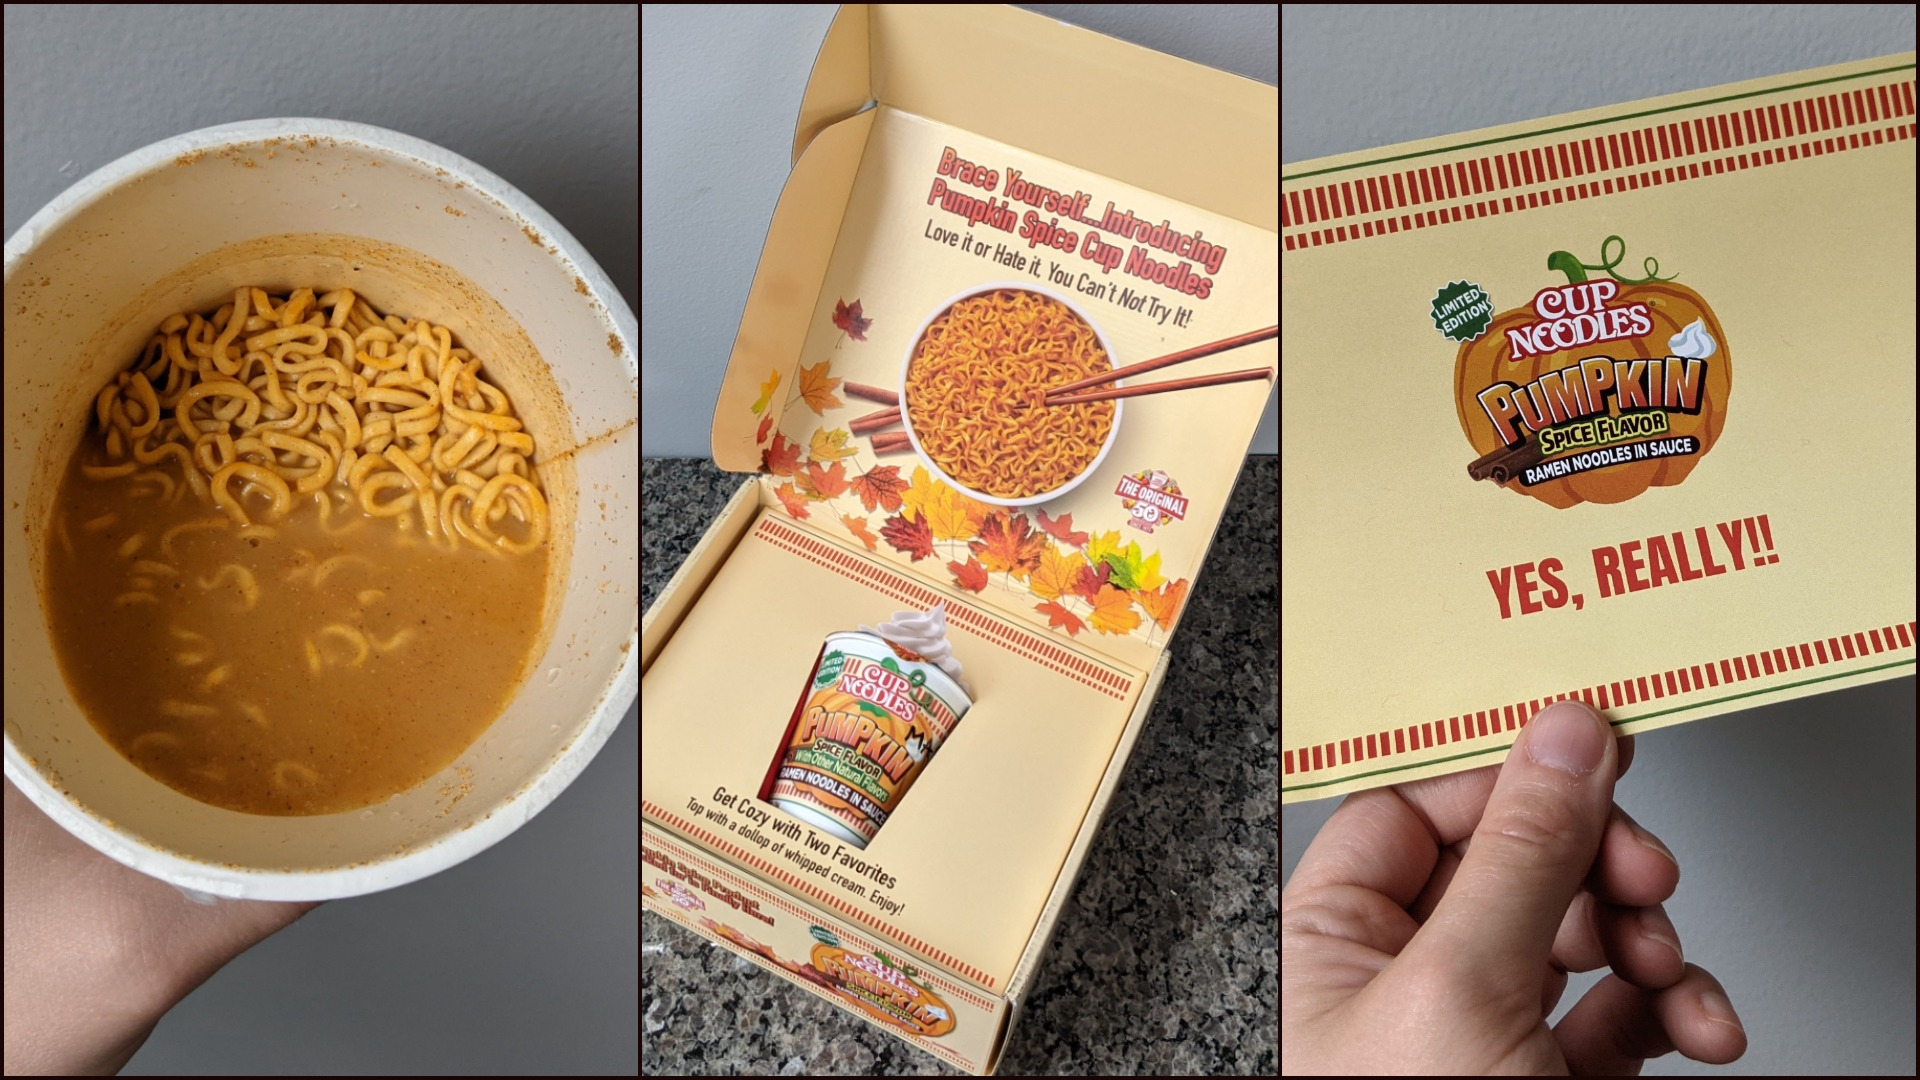 A cup of Pumpkin Spice Noodles pre-microwave; a gift box in which the noodles arrived; a card reading 